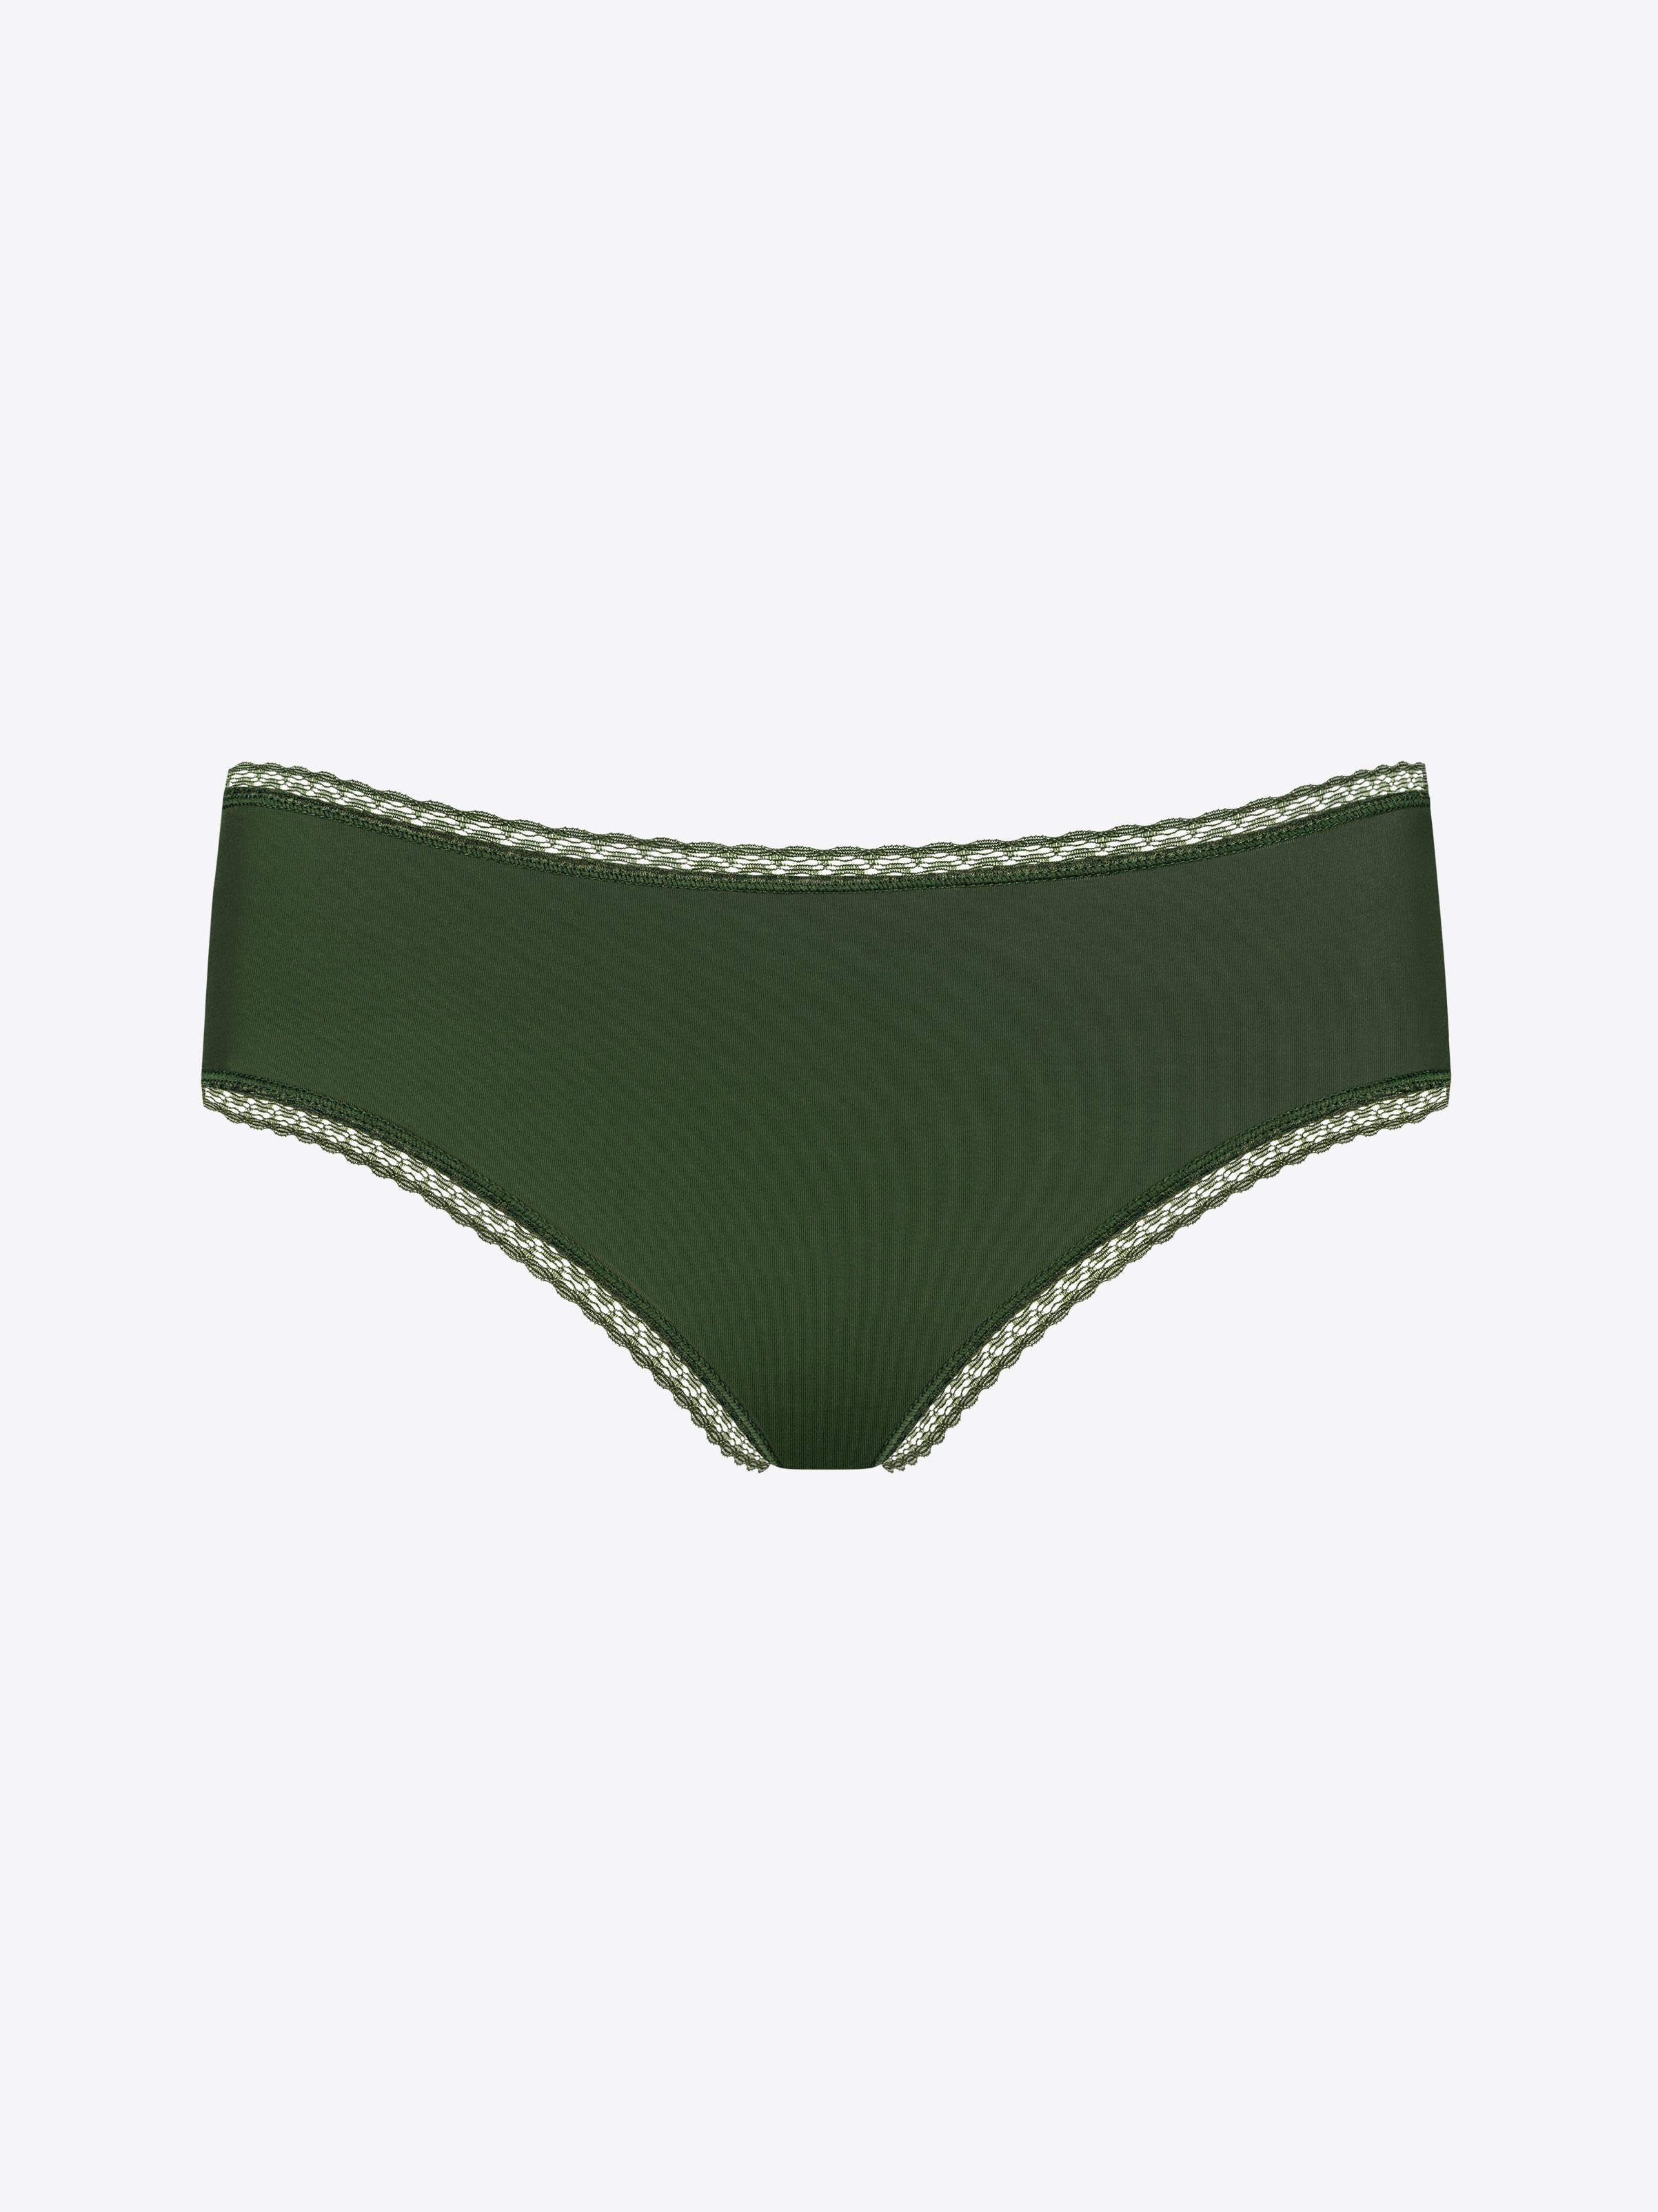 Buy Secret Shape Women's Olive Green Underwear Cotton Classic Printed  Hipster Panties Breathable Briefs (Size:-2XL) at